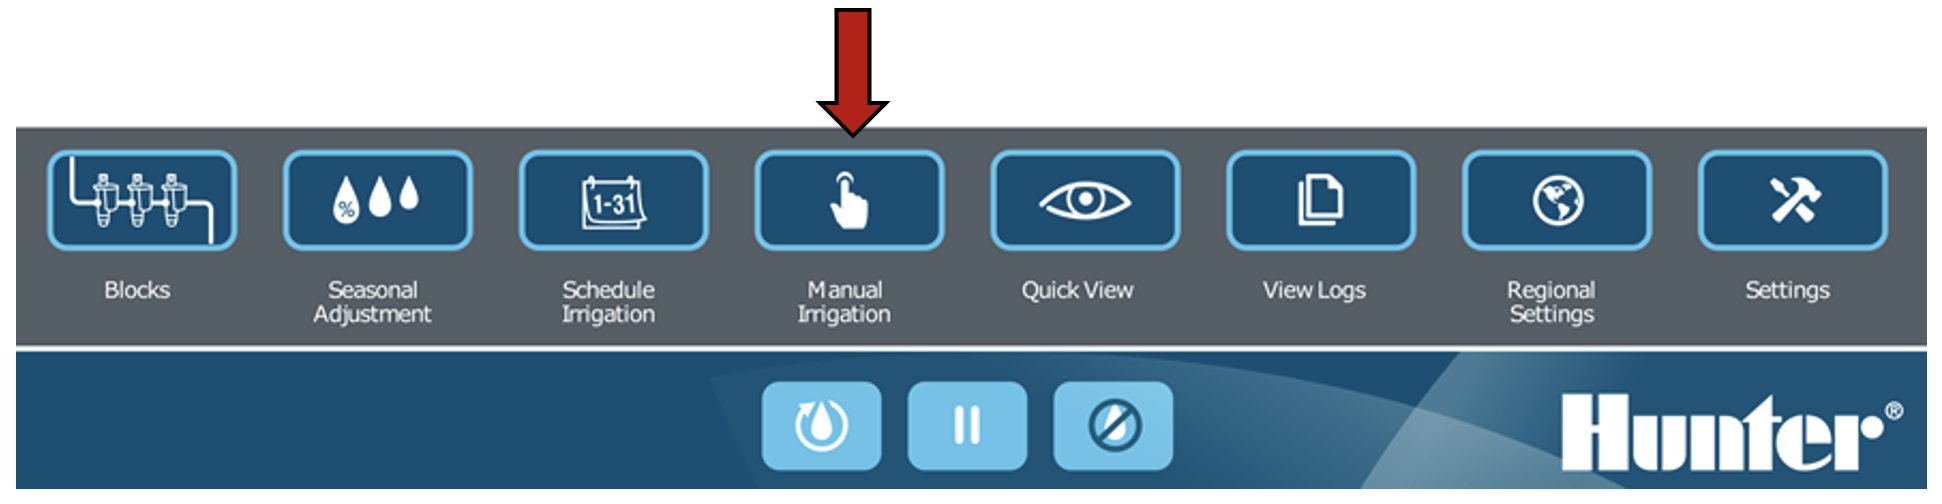 Image of the interface highlighting the Manual Irrigation button.